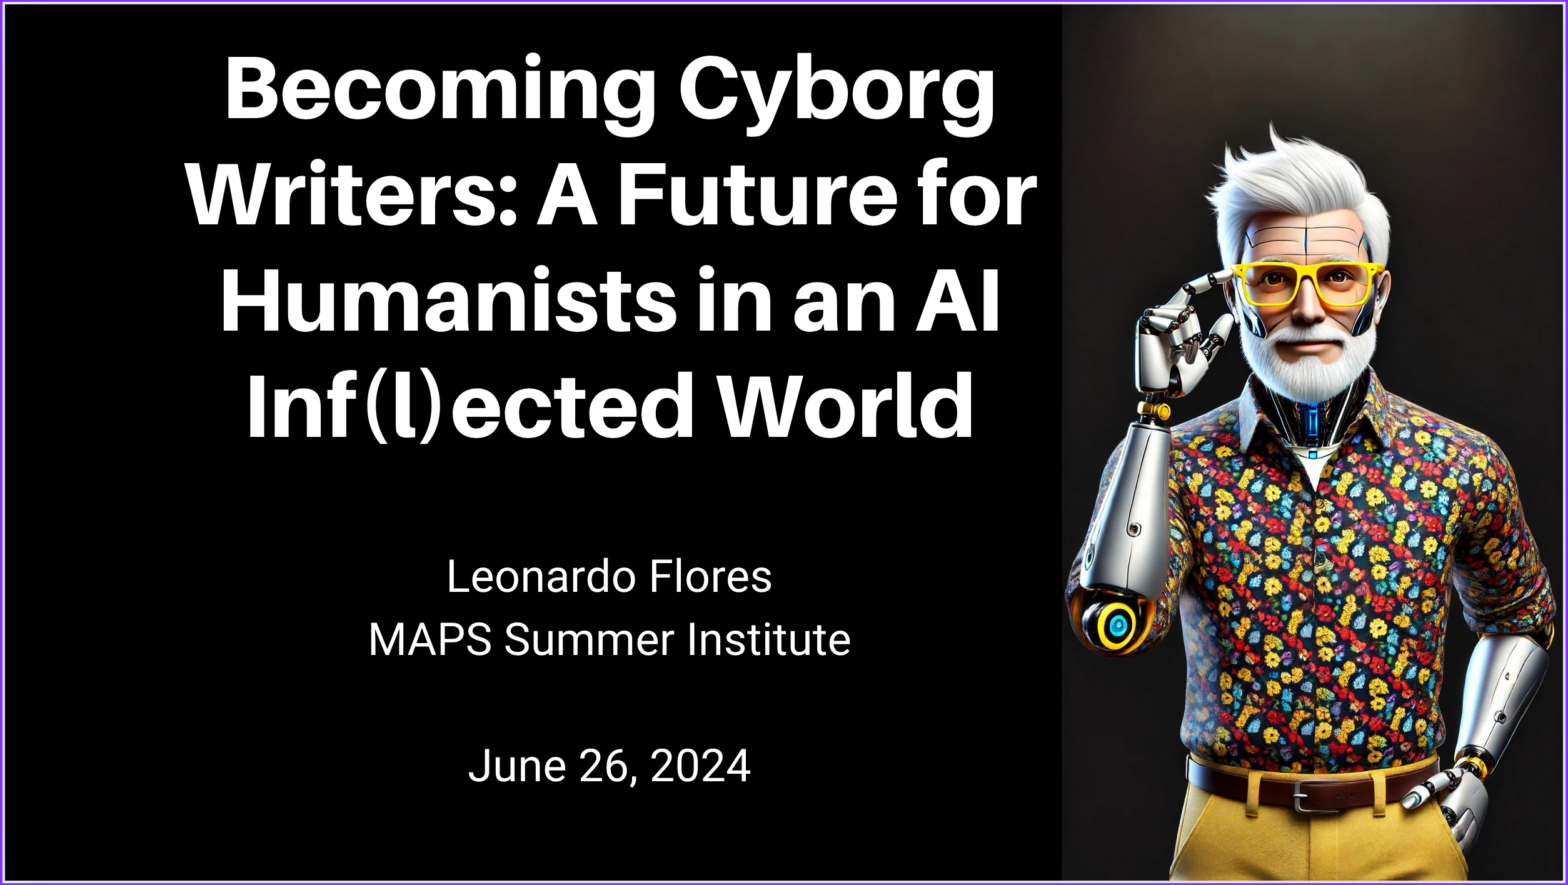 Screenshot of the first slide, with the title "Becoming Cyborg Writers: A Future for Humanists in an AI Inf(l)ected World" and an AI generated image of a cartoony Cyborg version of Leonardo Flores.